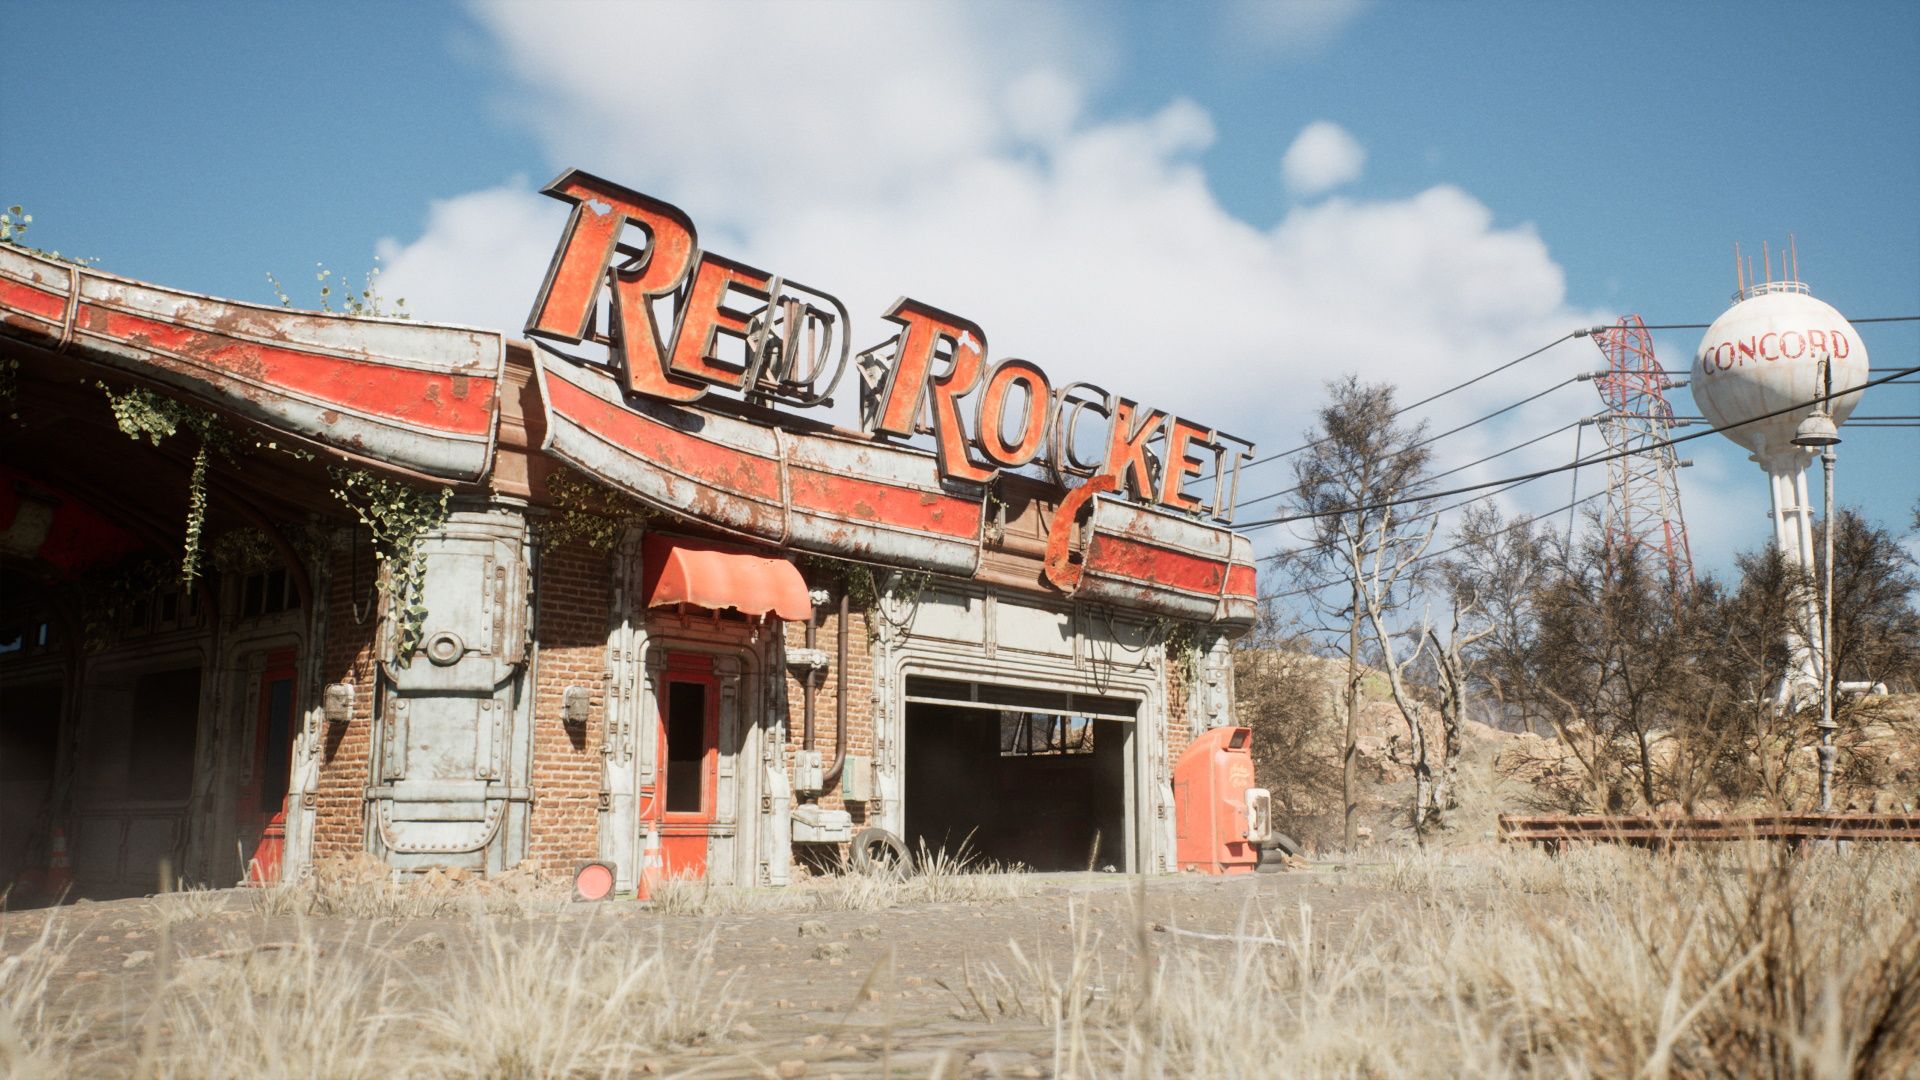 Red rocket fallout 4 фото 28